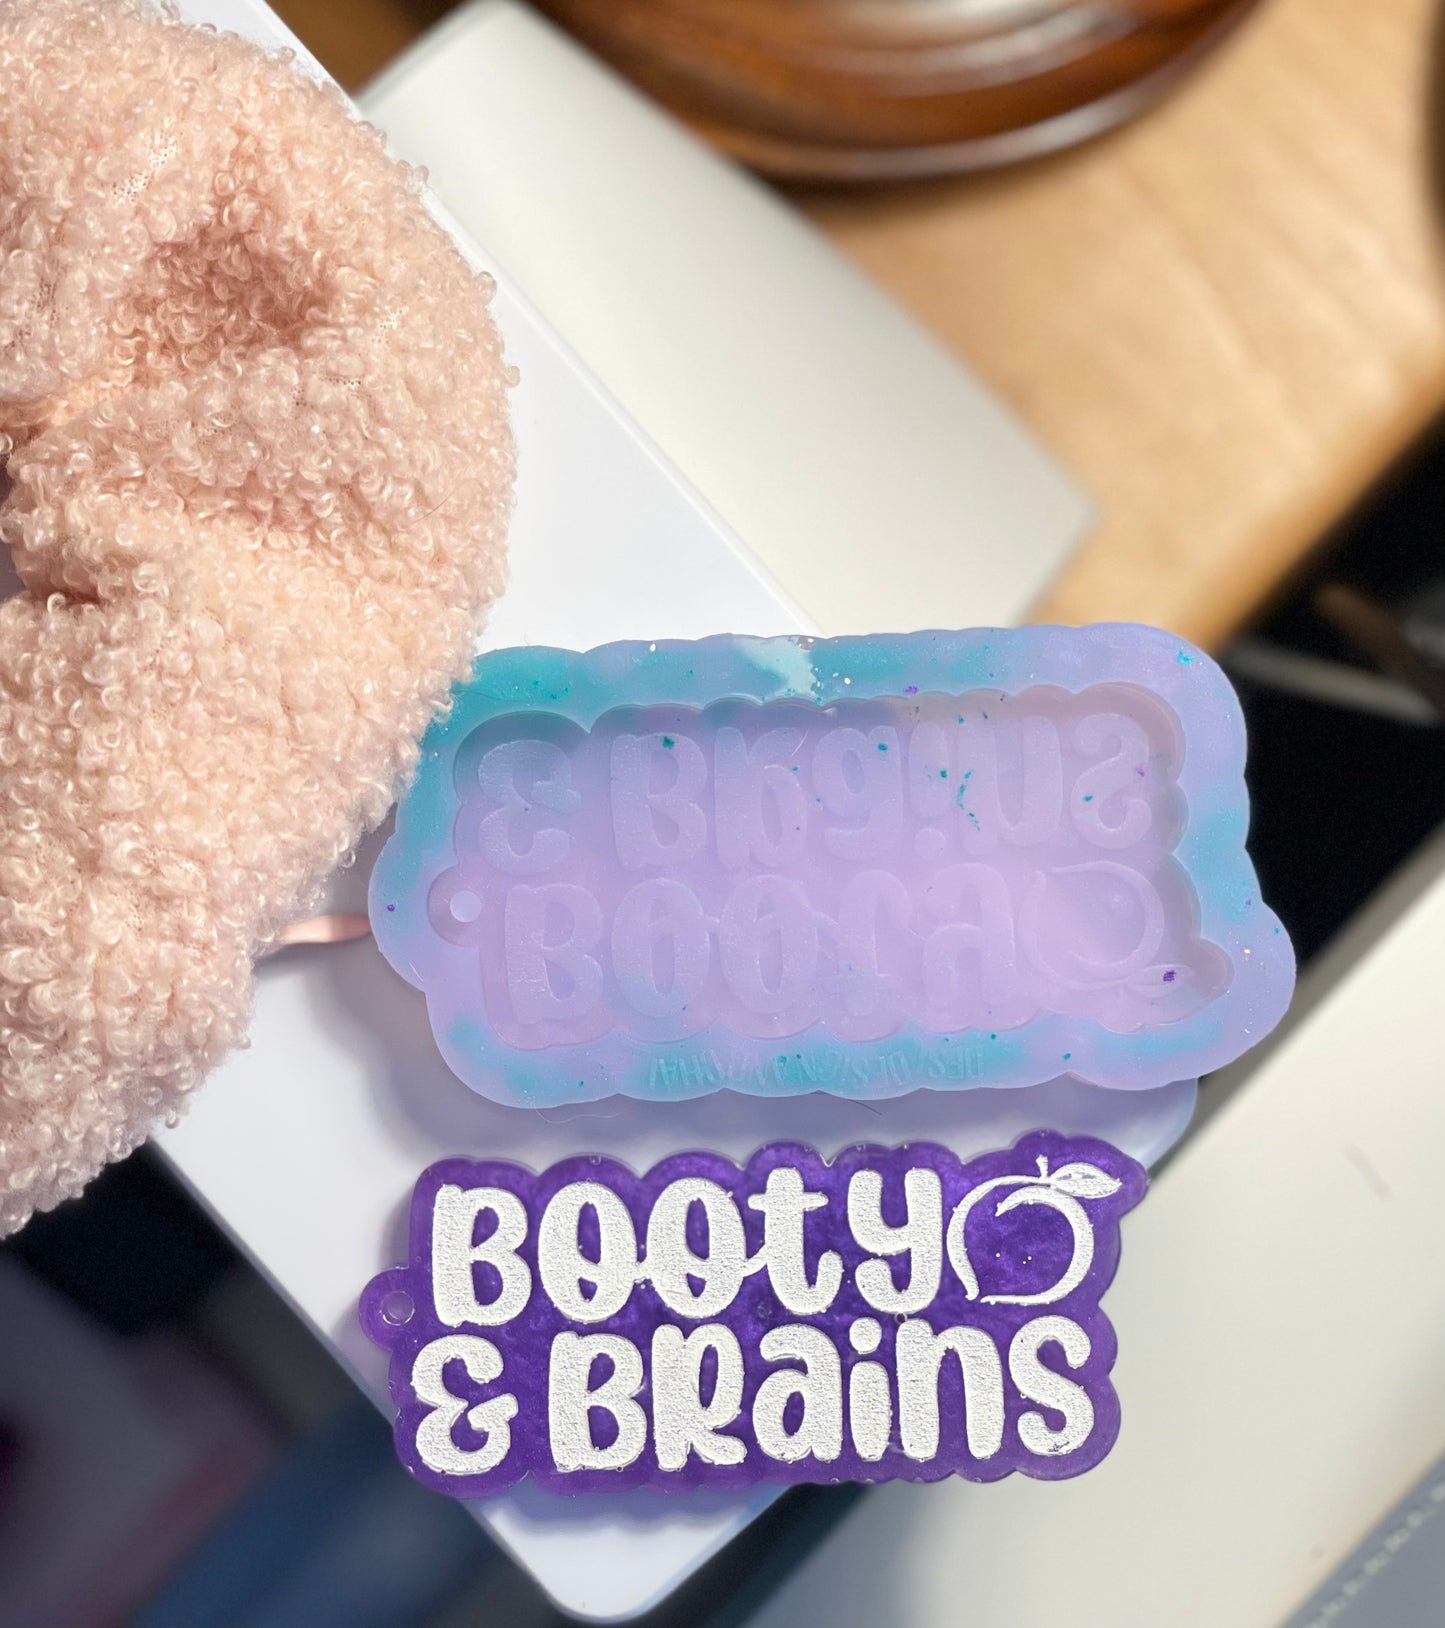 Booty and brains keychains or earrings silicone molds